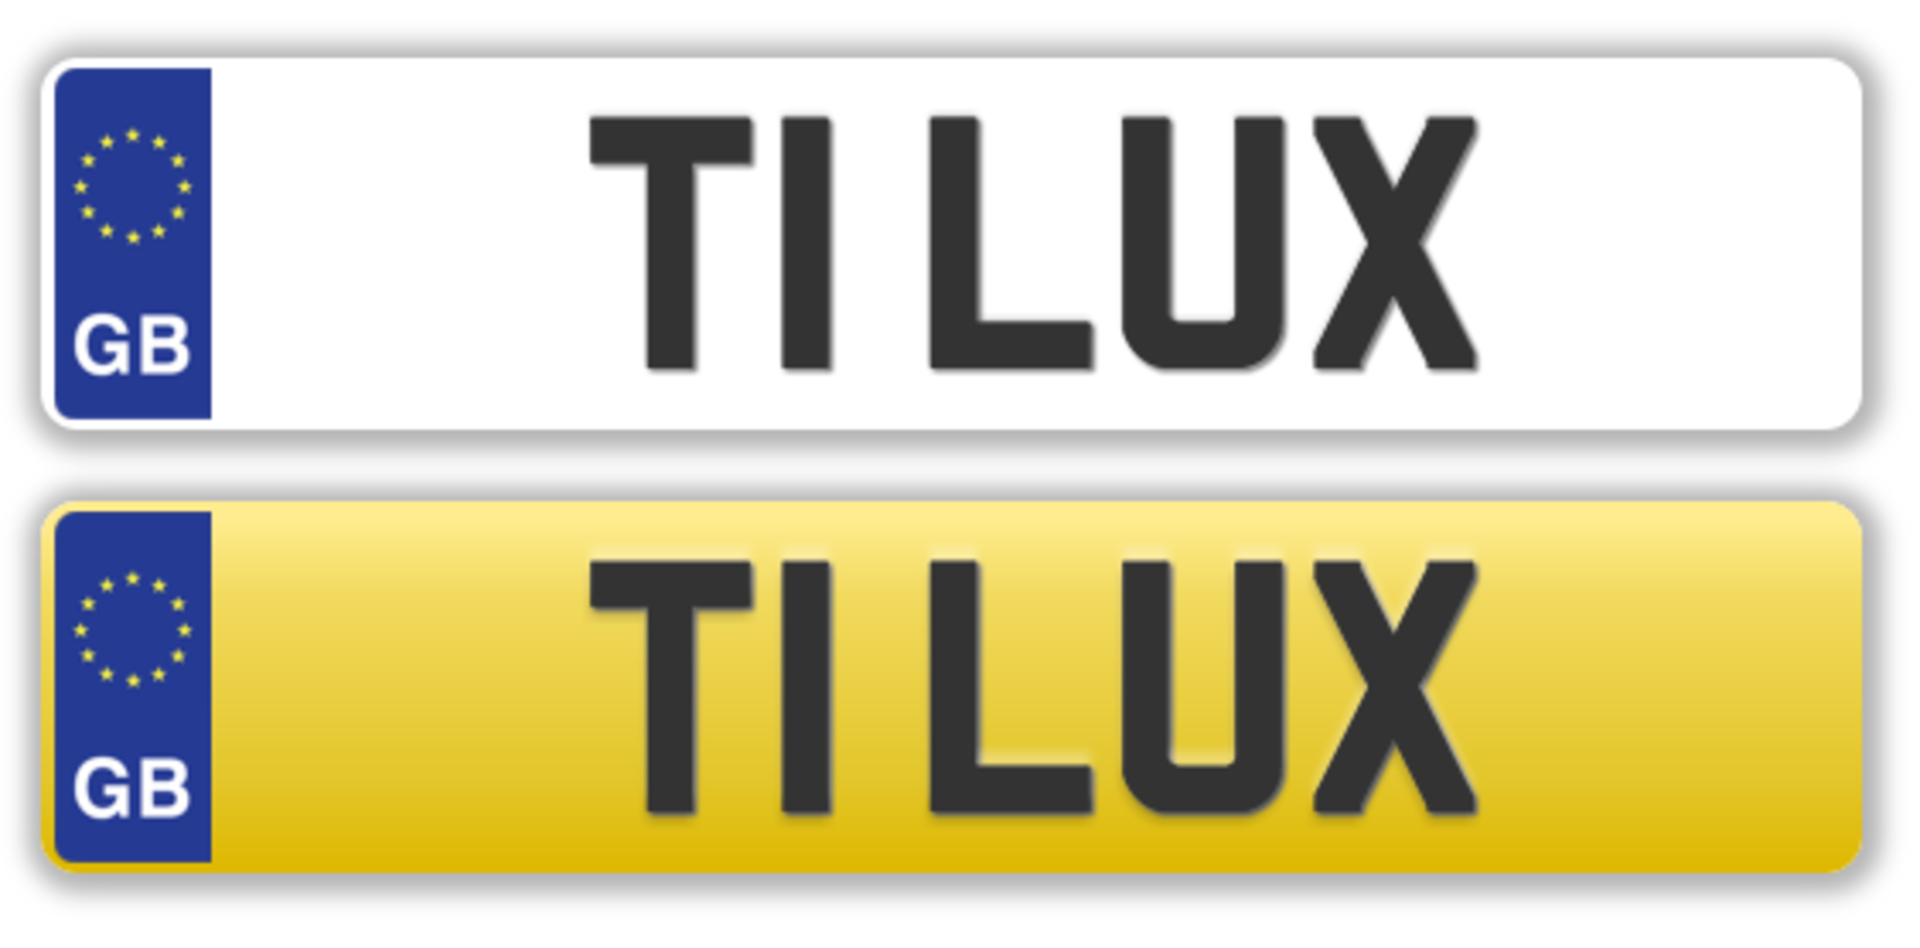 Cherished Plate - TI LUX - No transfer fees. All registrations on retention and ready to transfer.